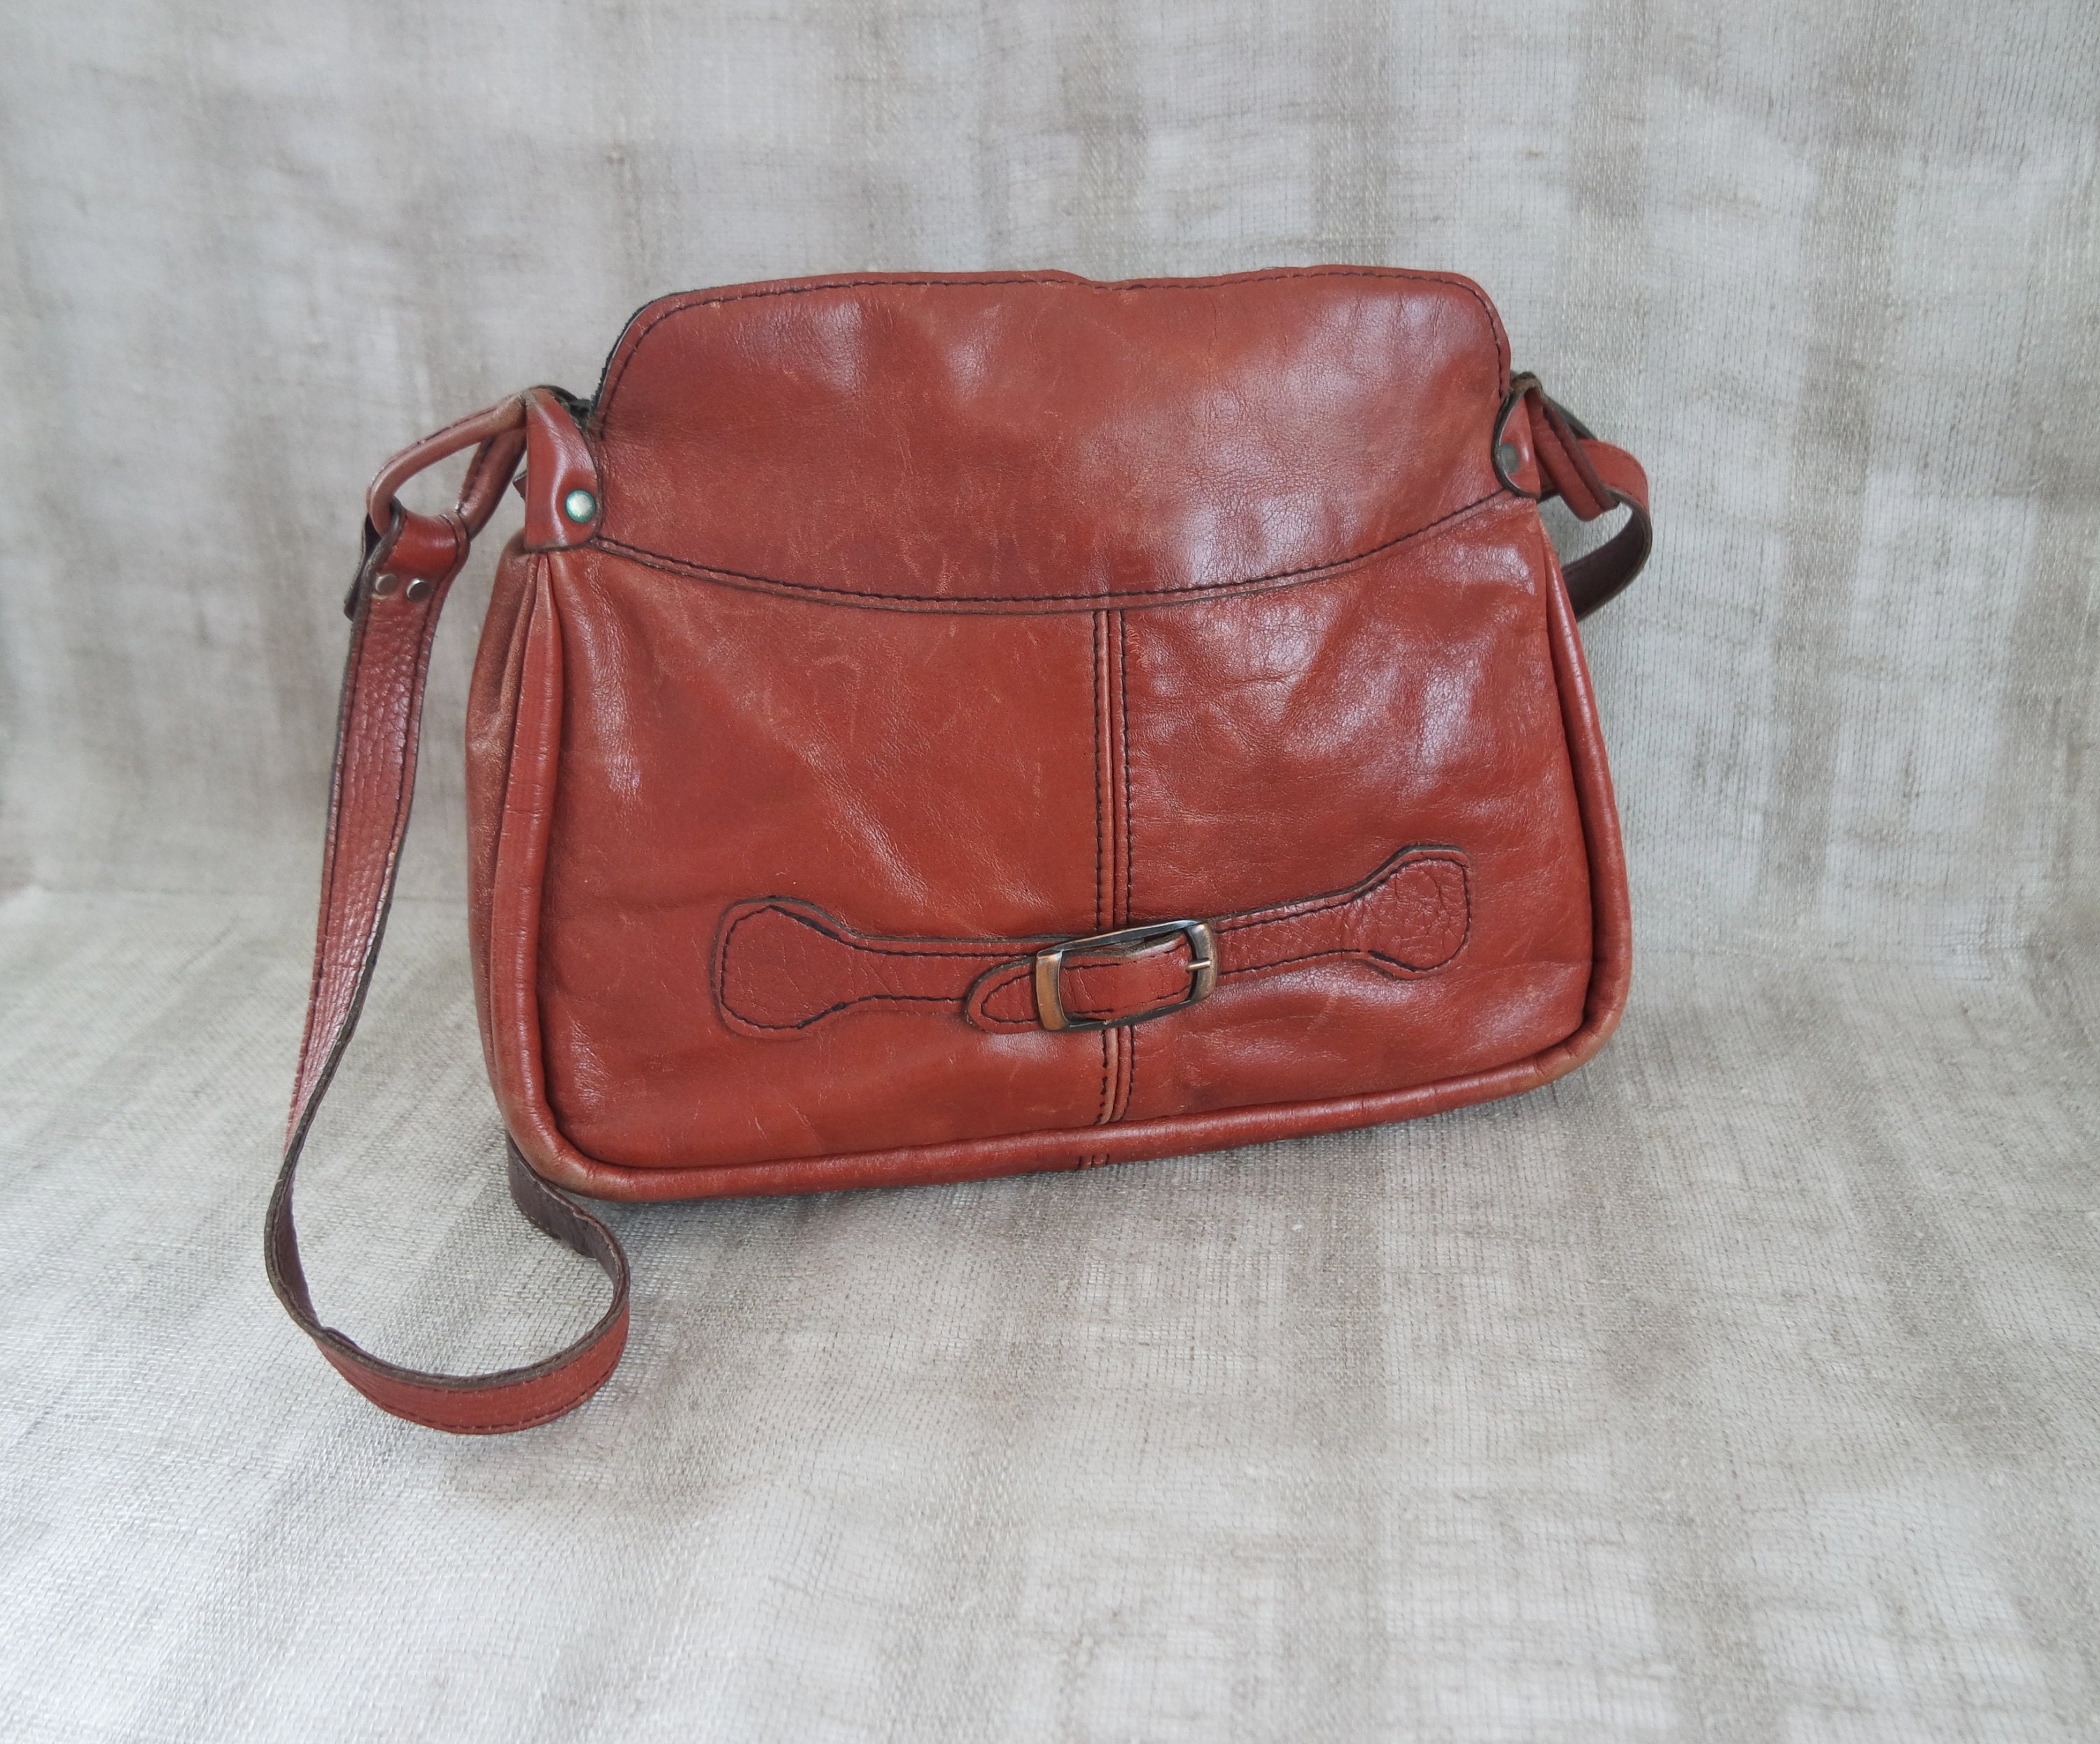 Buy Vintage Bally Italy Crossbody Brown Trim Black Leather Bag for USD  44.99 | GoodwillFinds